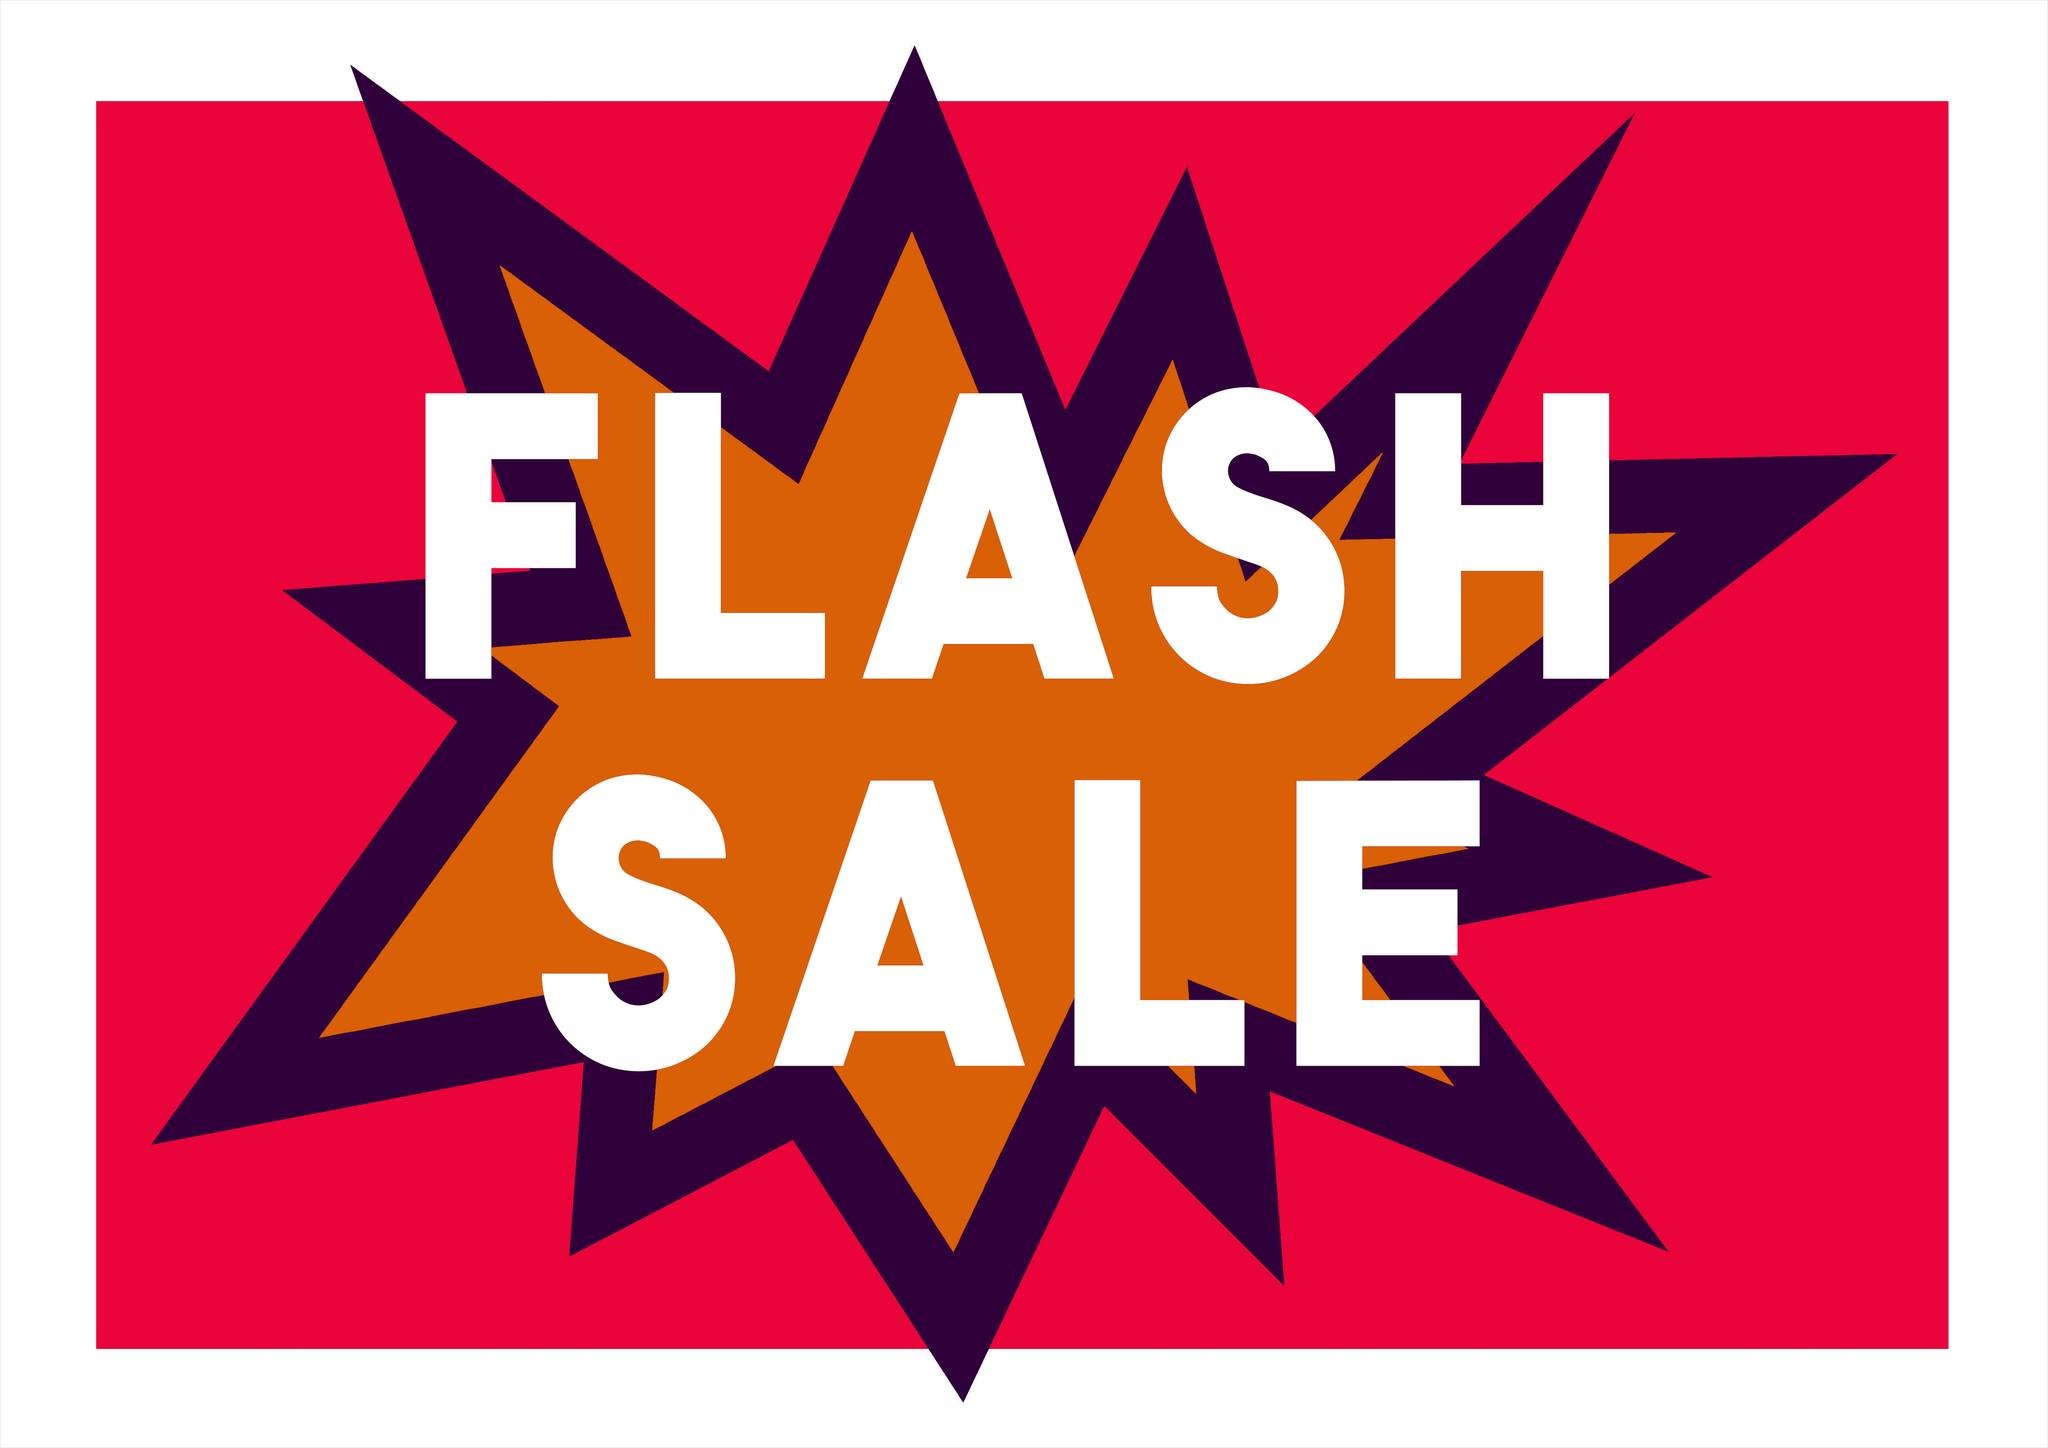 💥 FLASH SALE - 20% off all prints when you spend &pound;75 or more online: www.acgallery.co.uk

ENDS MIDNIGHT TUESDAY 23RD APRIL!

Discounts automatically applied at the checkout (excludes Peter Brook signed prints)